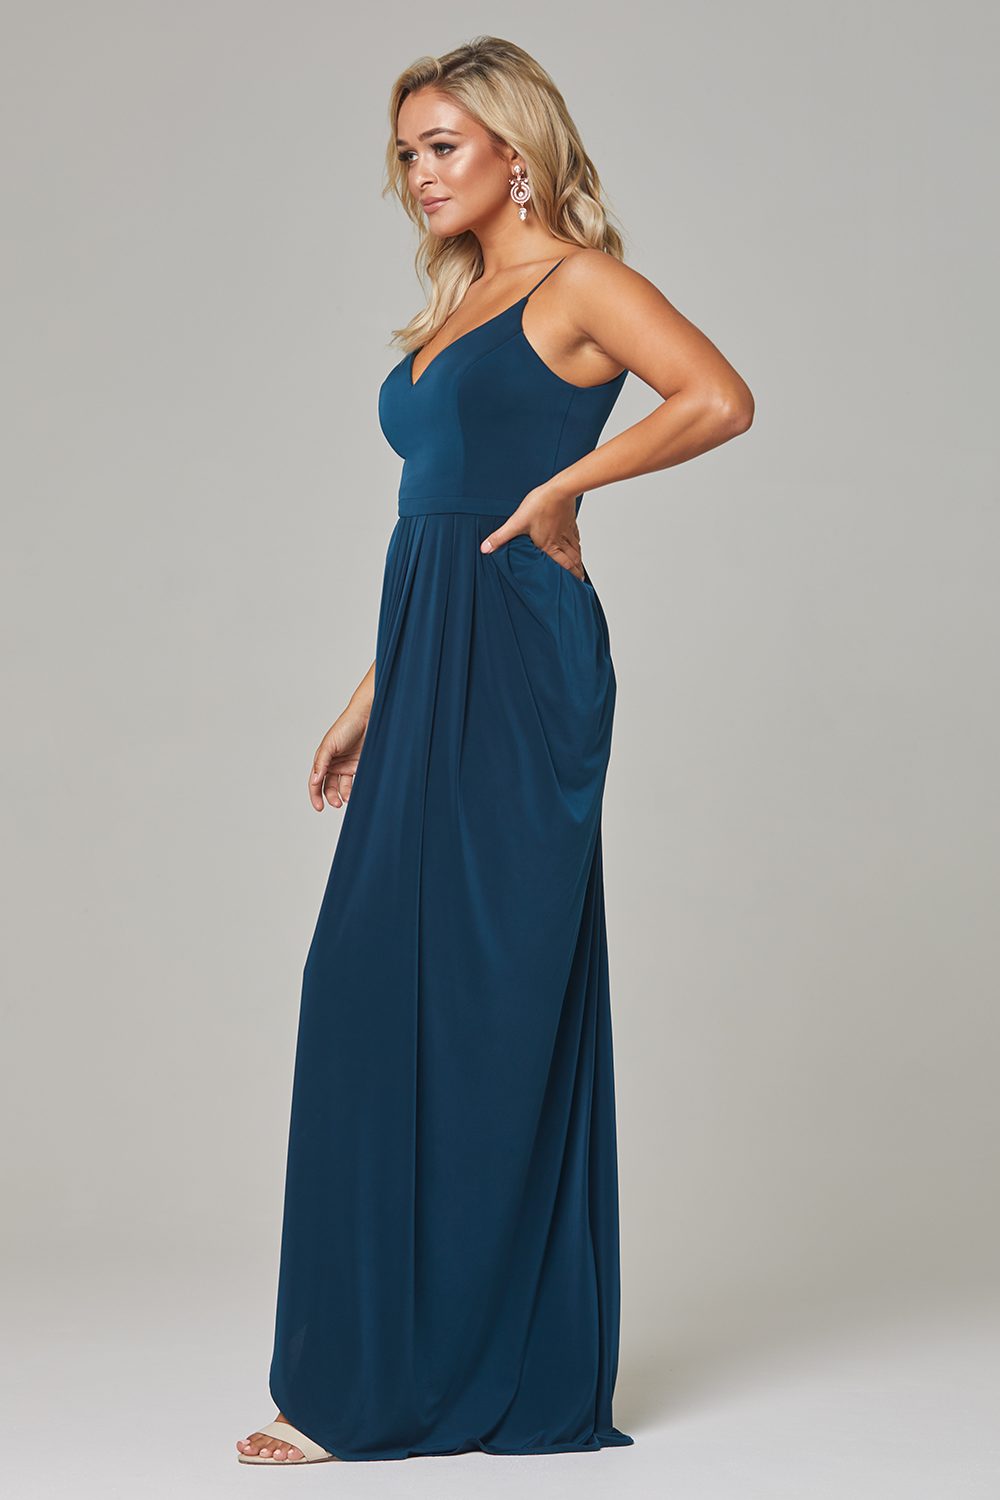 Tania Olsen Designs TO801 Claire Dress - Teal